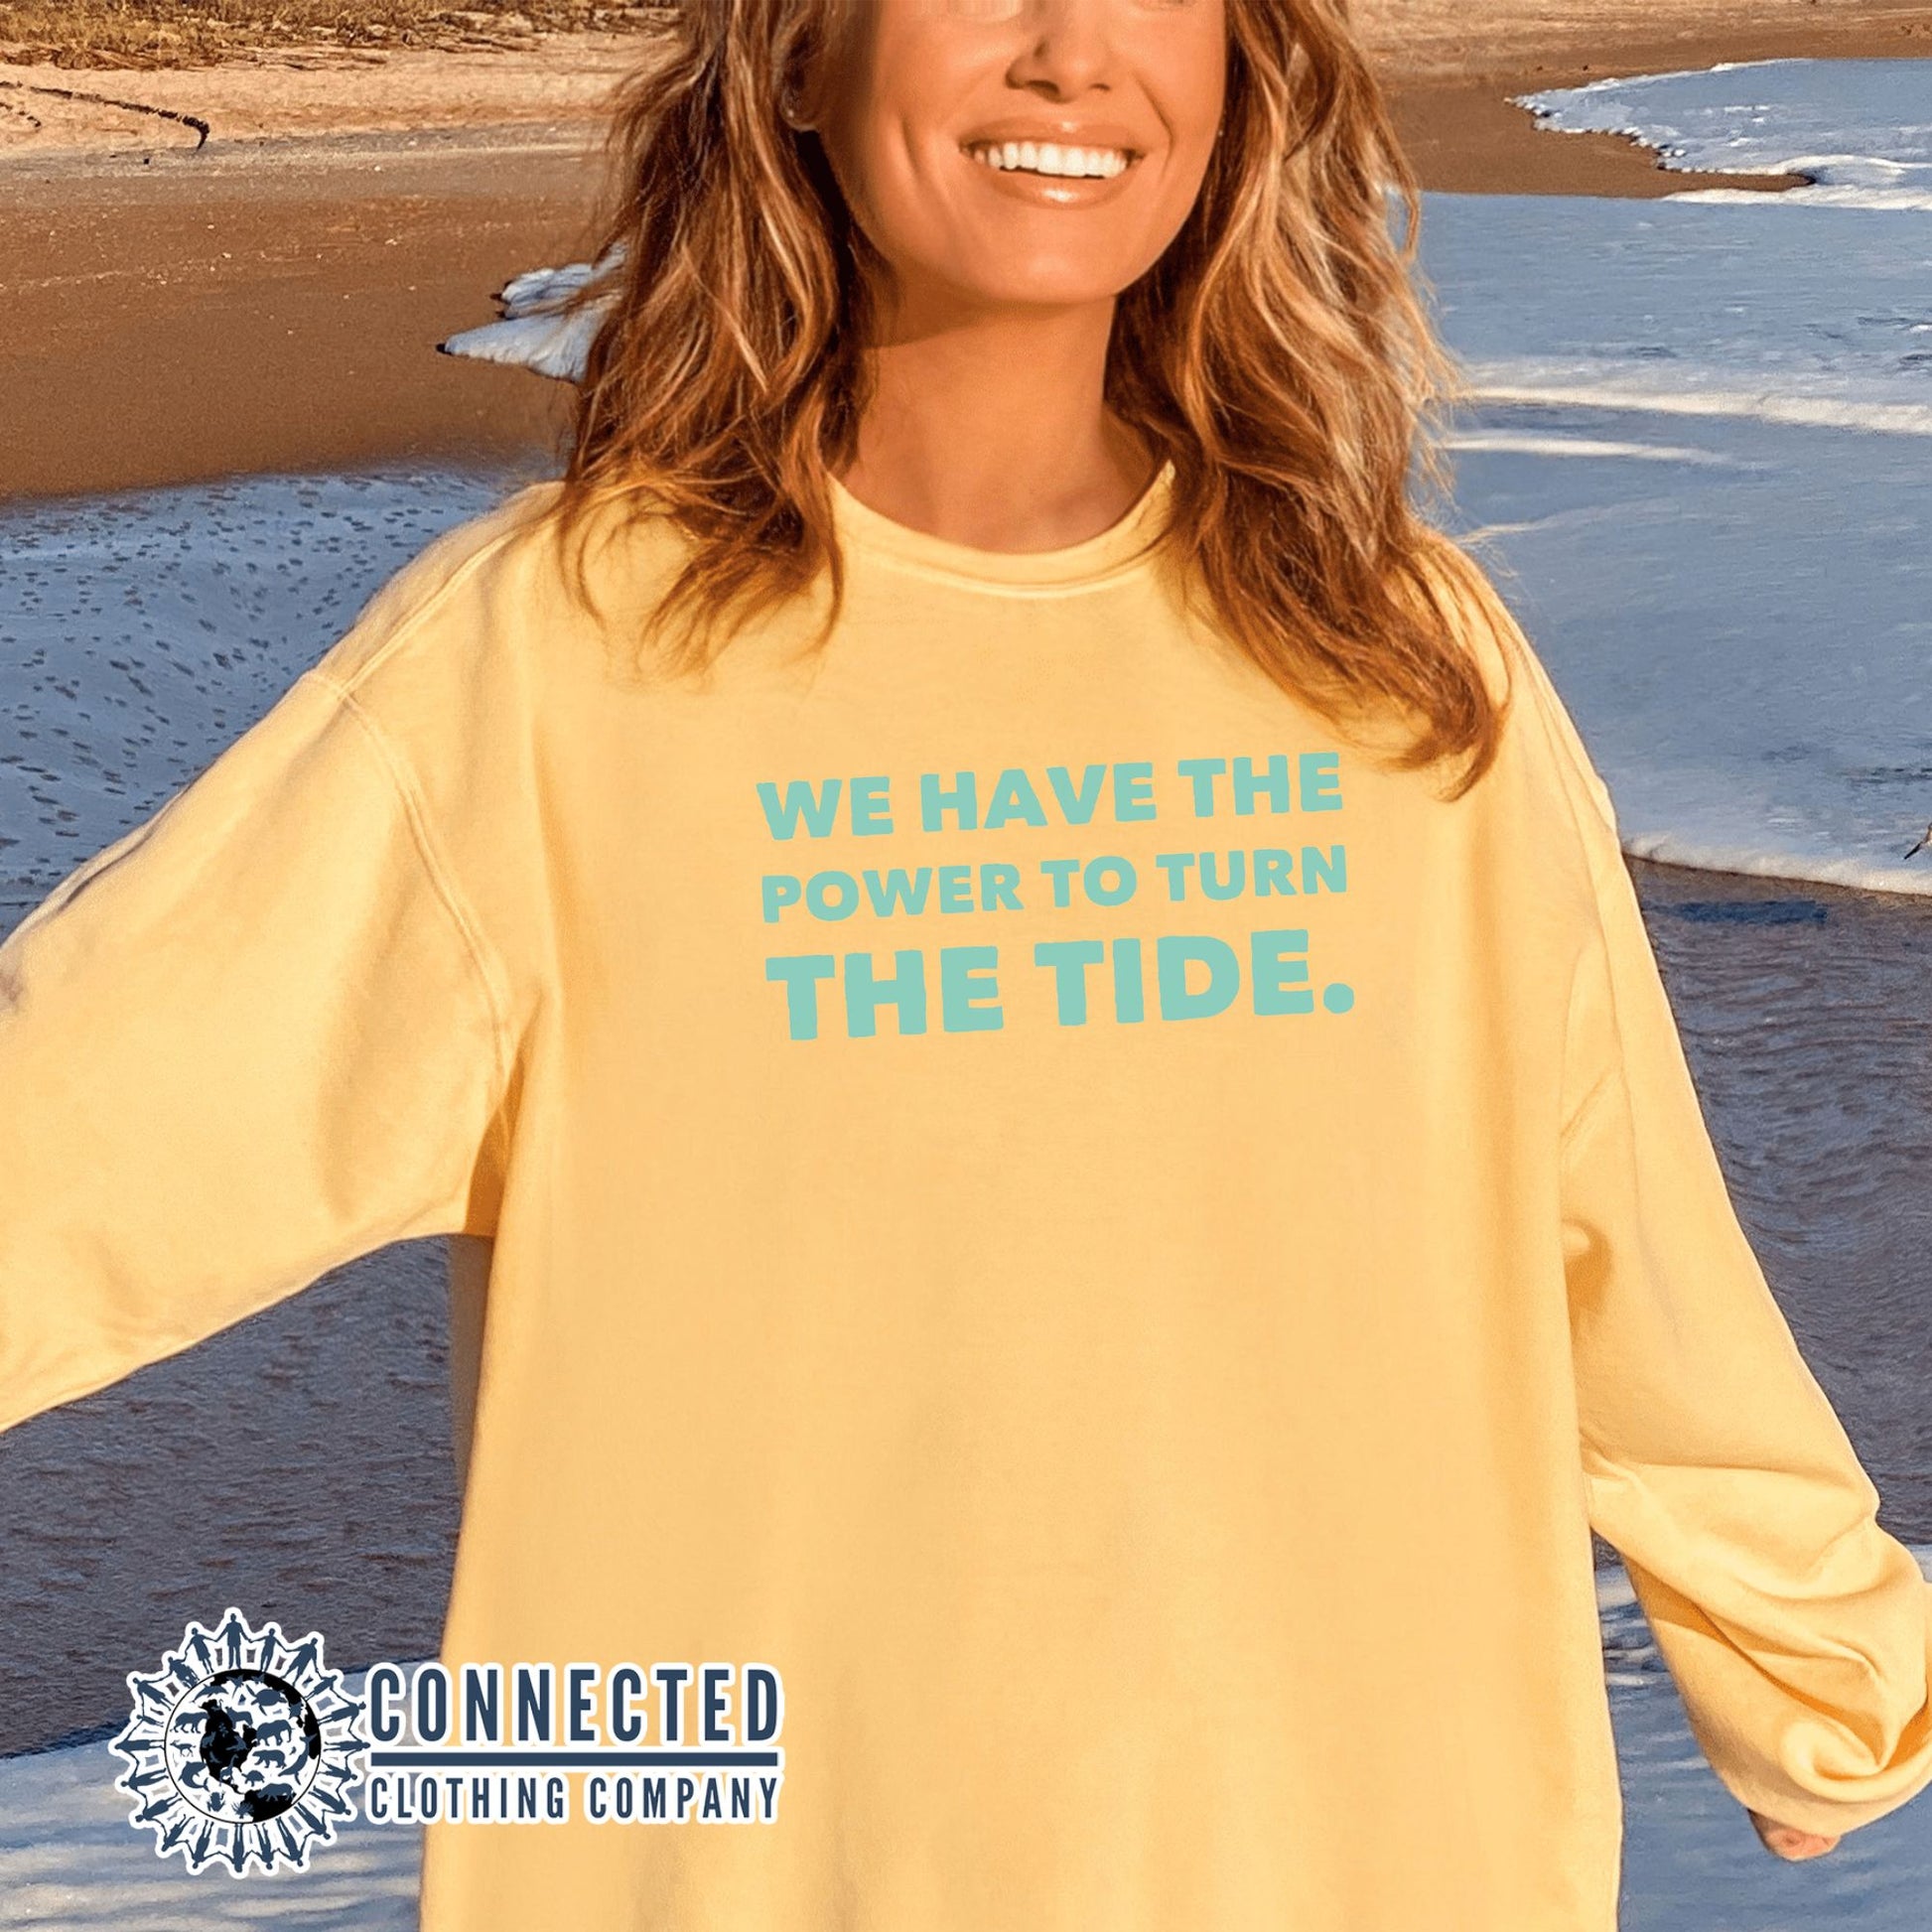 Turn The Tide Crewneck Sweatshirt - Connected Clothing Company - 10% of the proceeds donated to ocean conservation